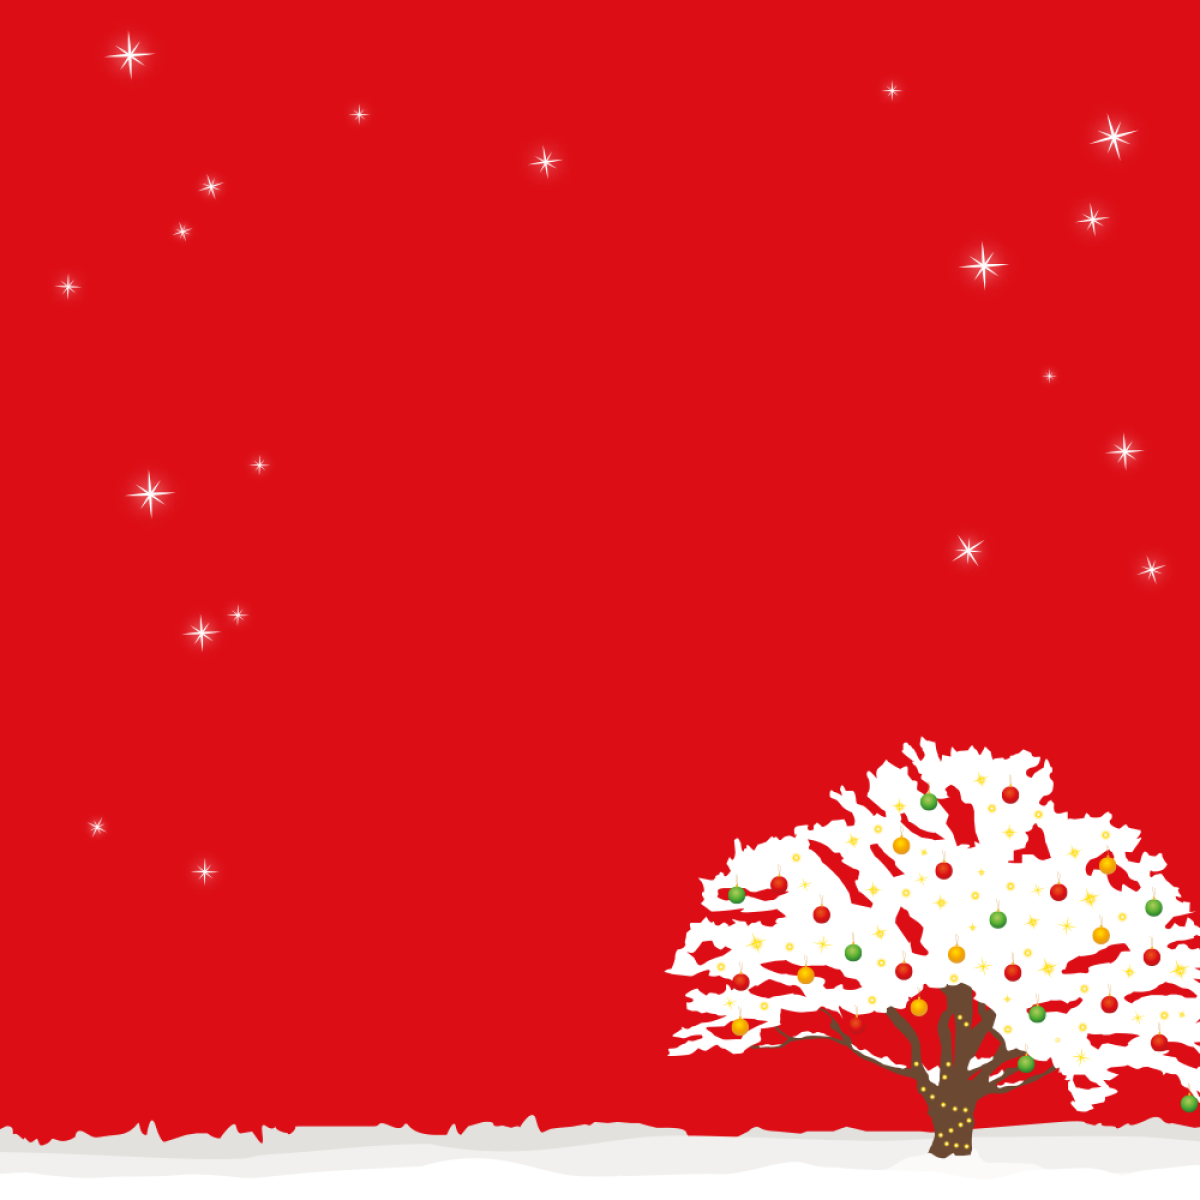 Red backgrouns with a white broadleaf tree covered in lights and baubles bottom right